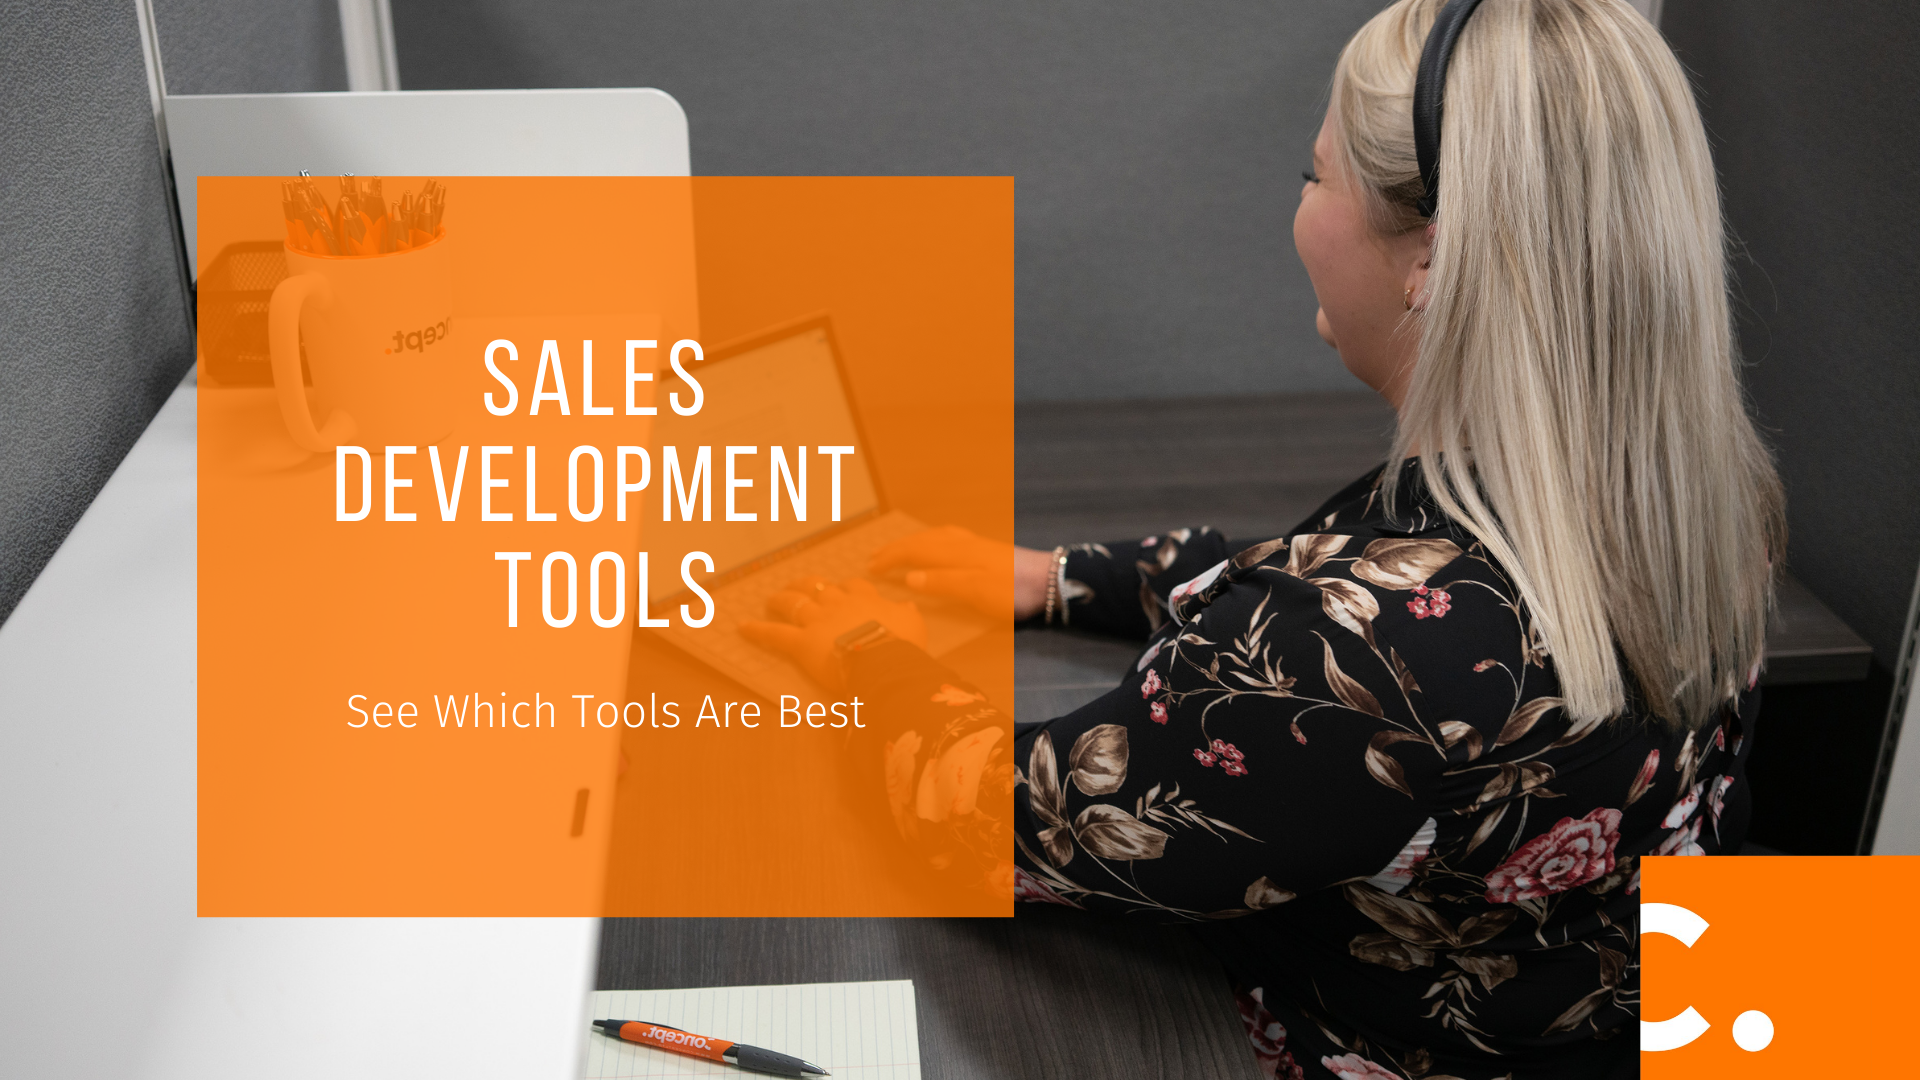 Reach which sales development tools are key to successful lead generation service.